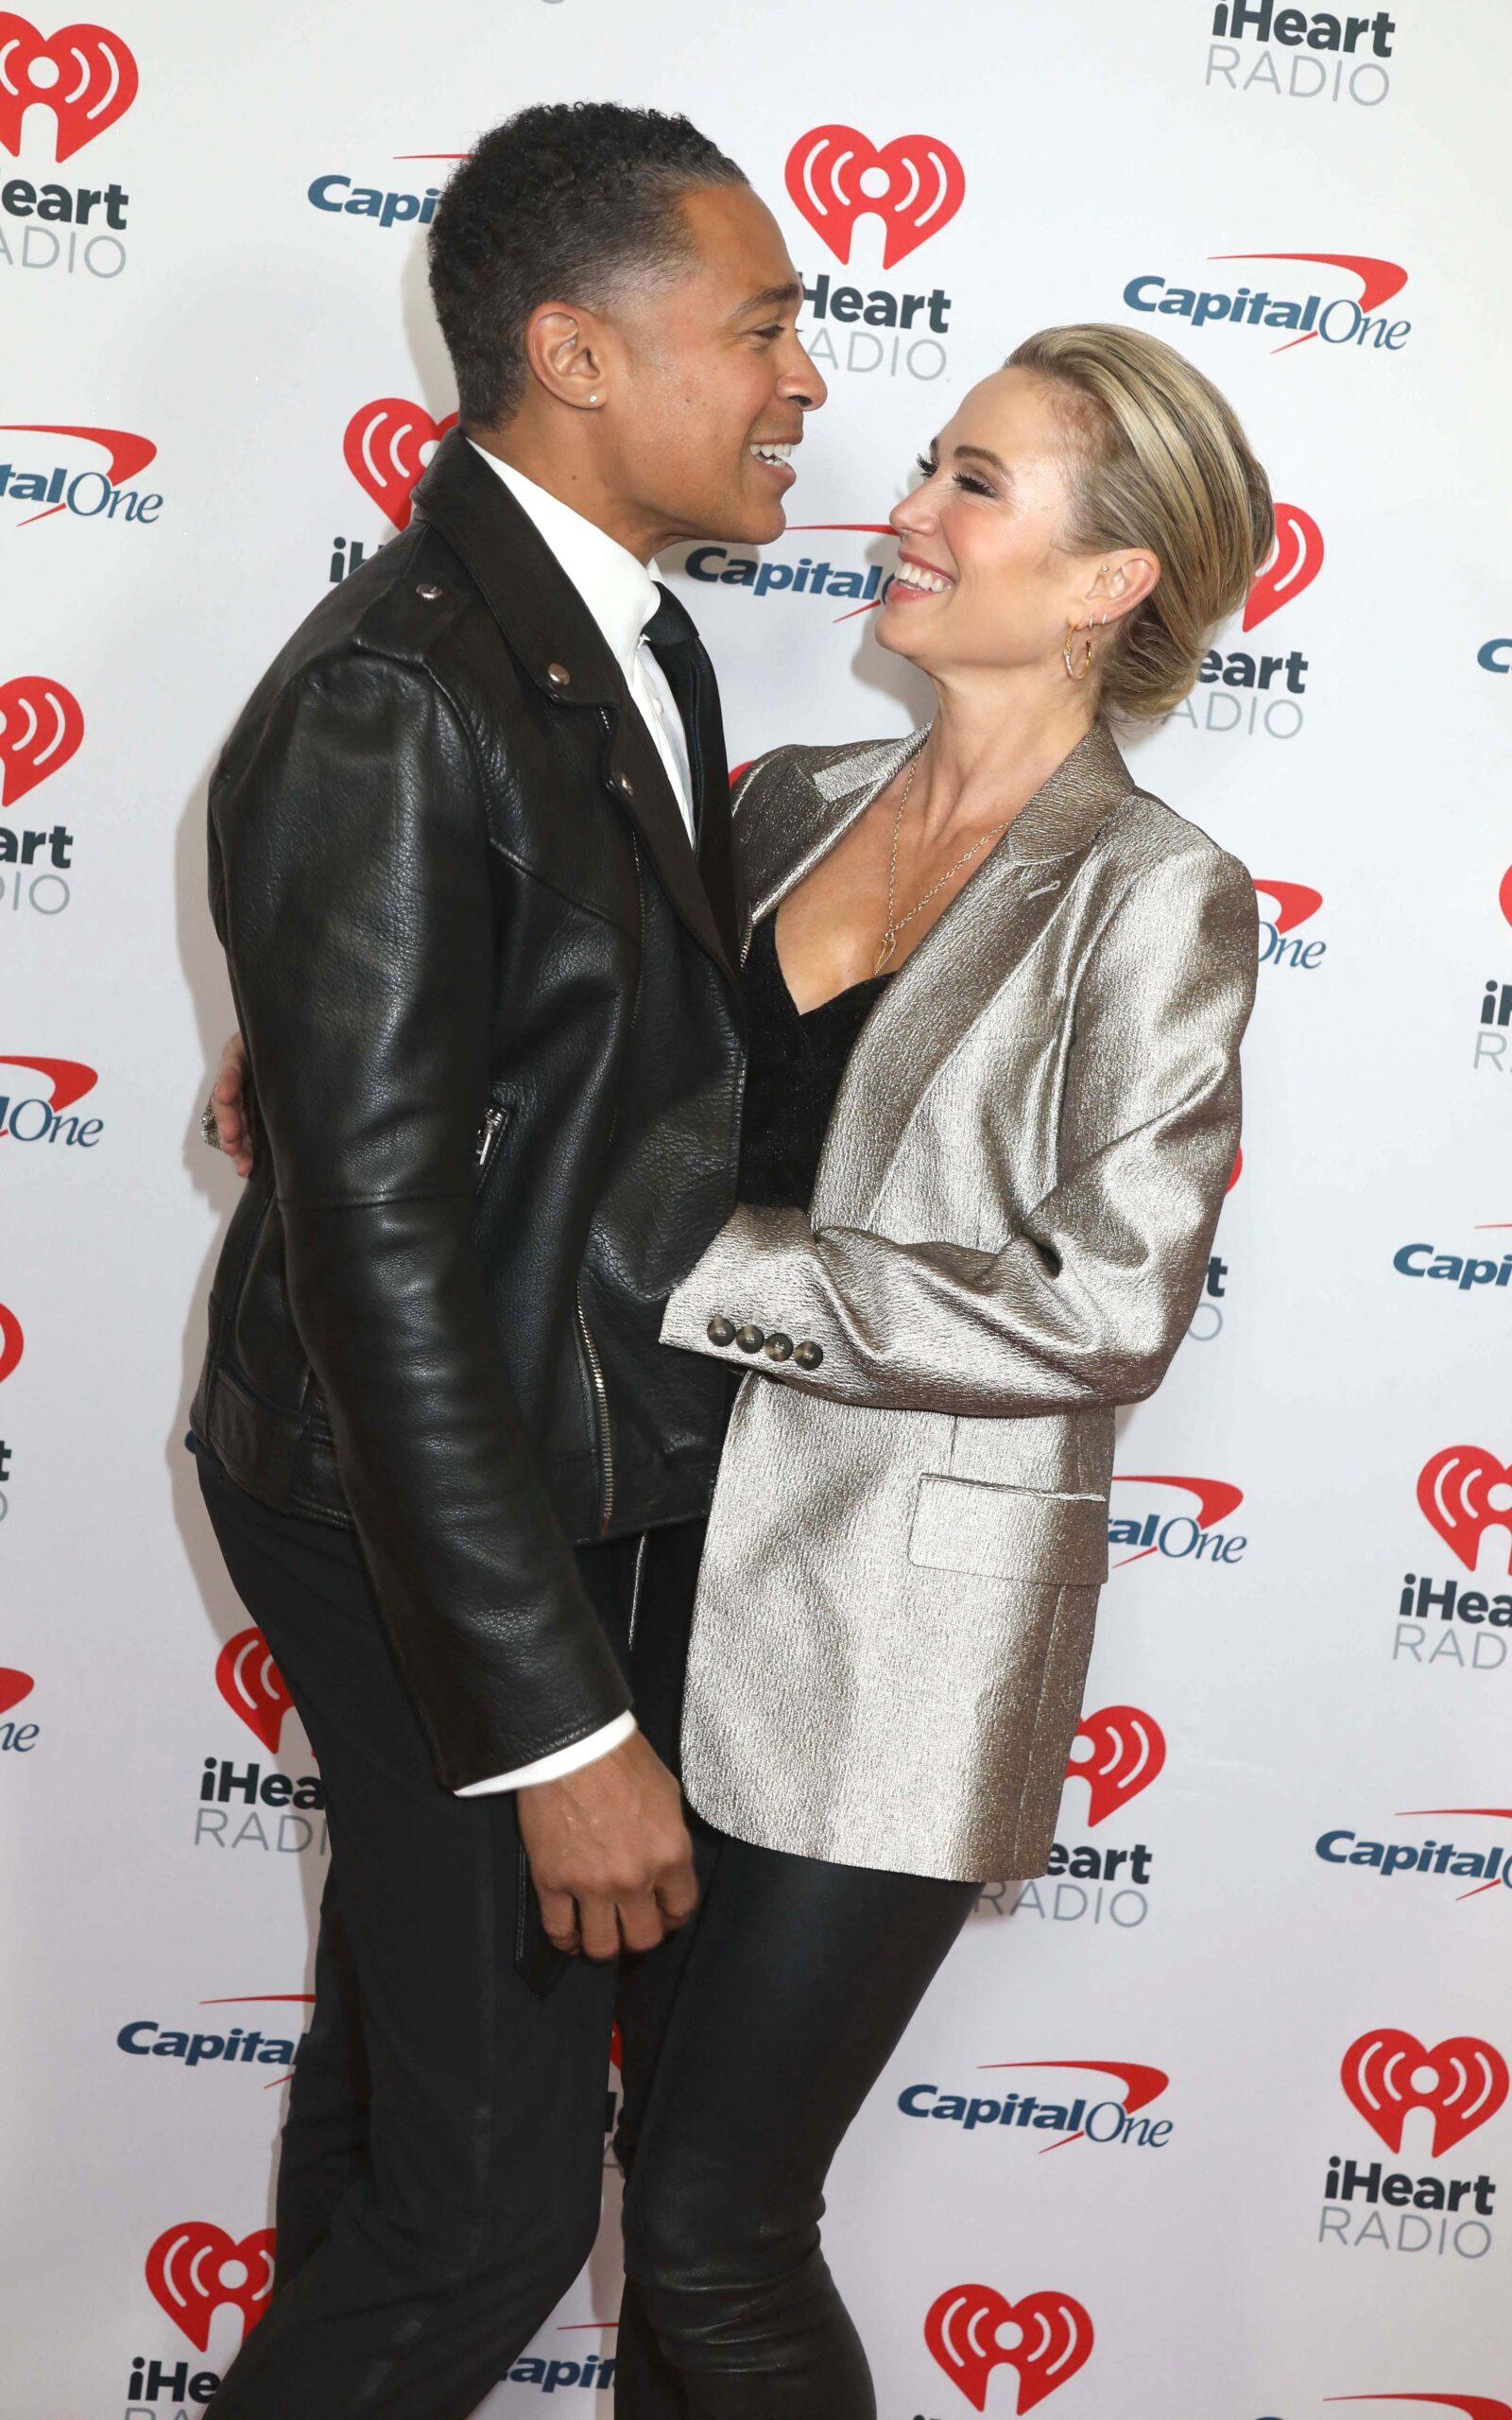 Amy Robach & T.J. Holmes Reveal They Have 'Big Blowout' Fights And Are Unsure About Marriage